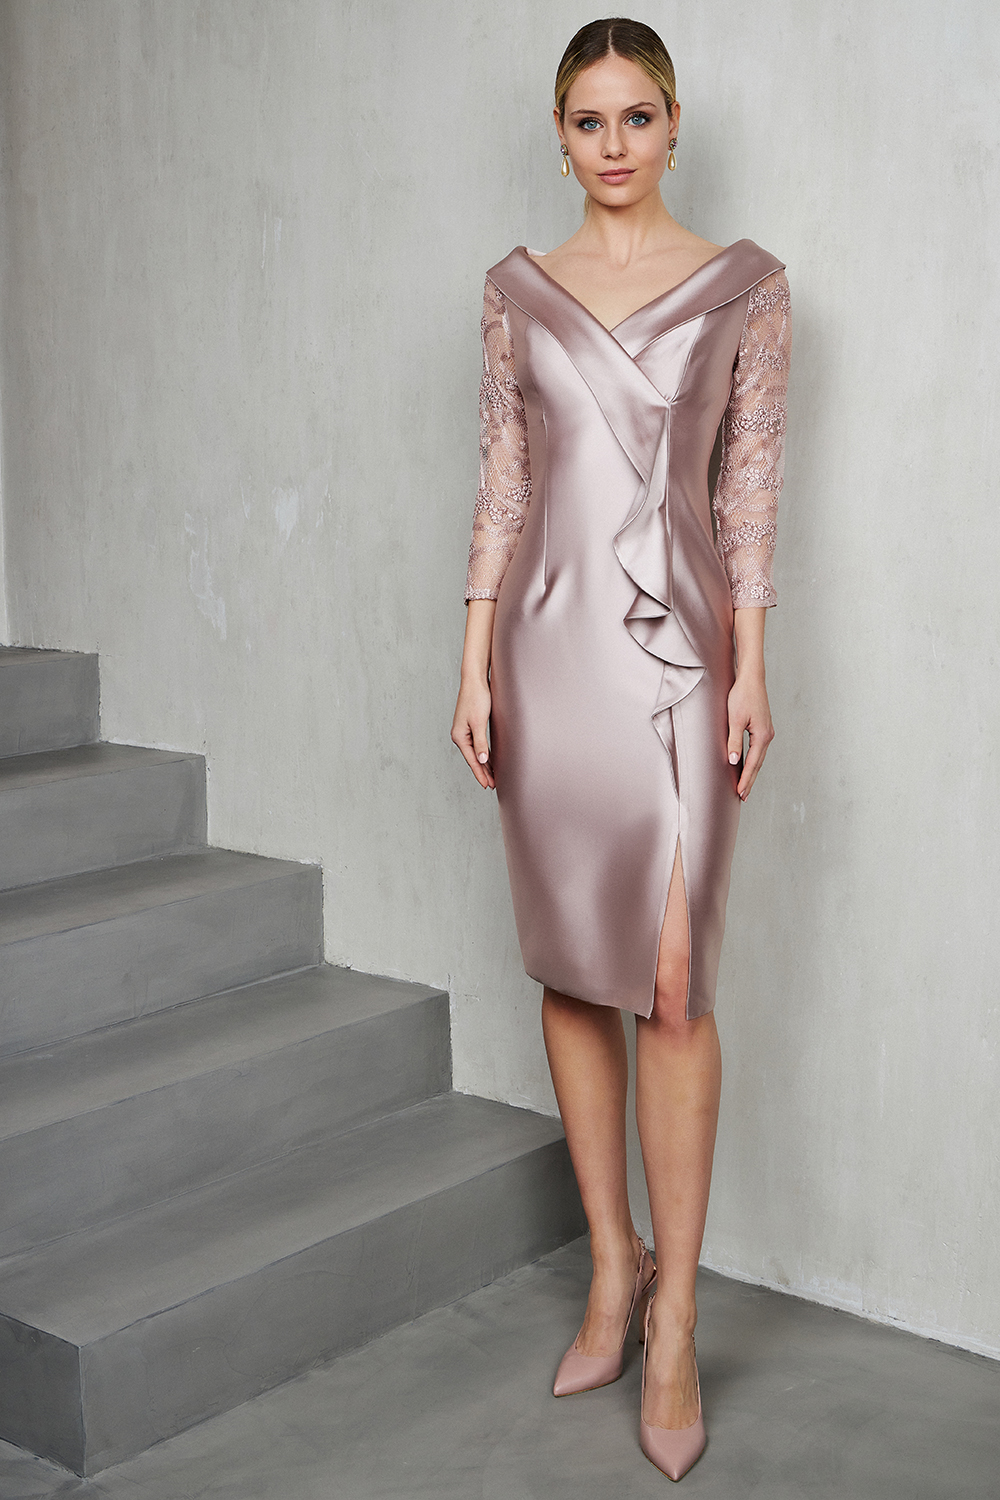 Classic Dresses / Short evening satin dress with lace on the sleeves for the mother of the bride